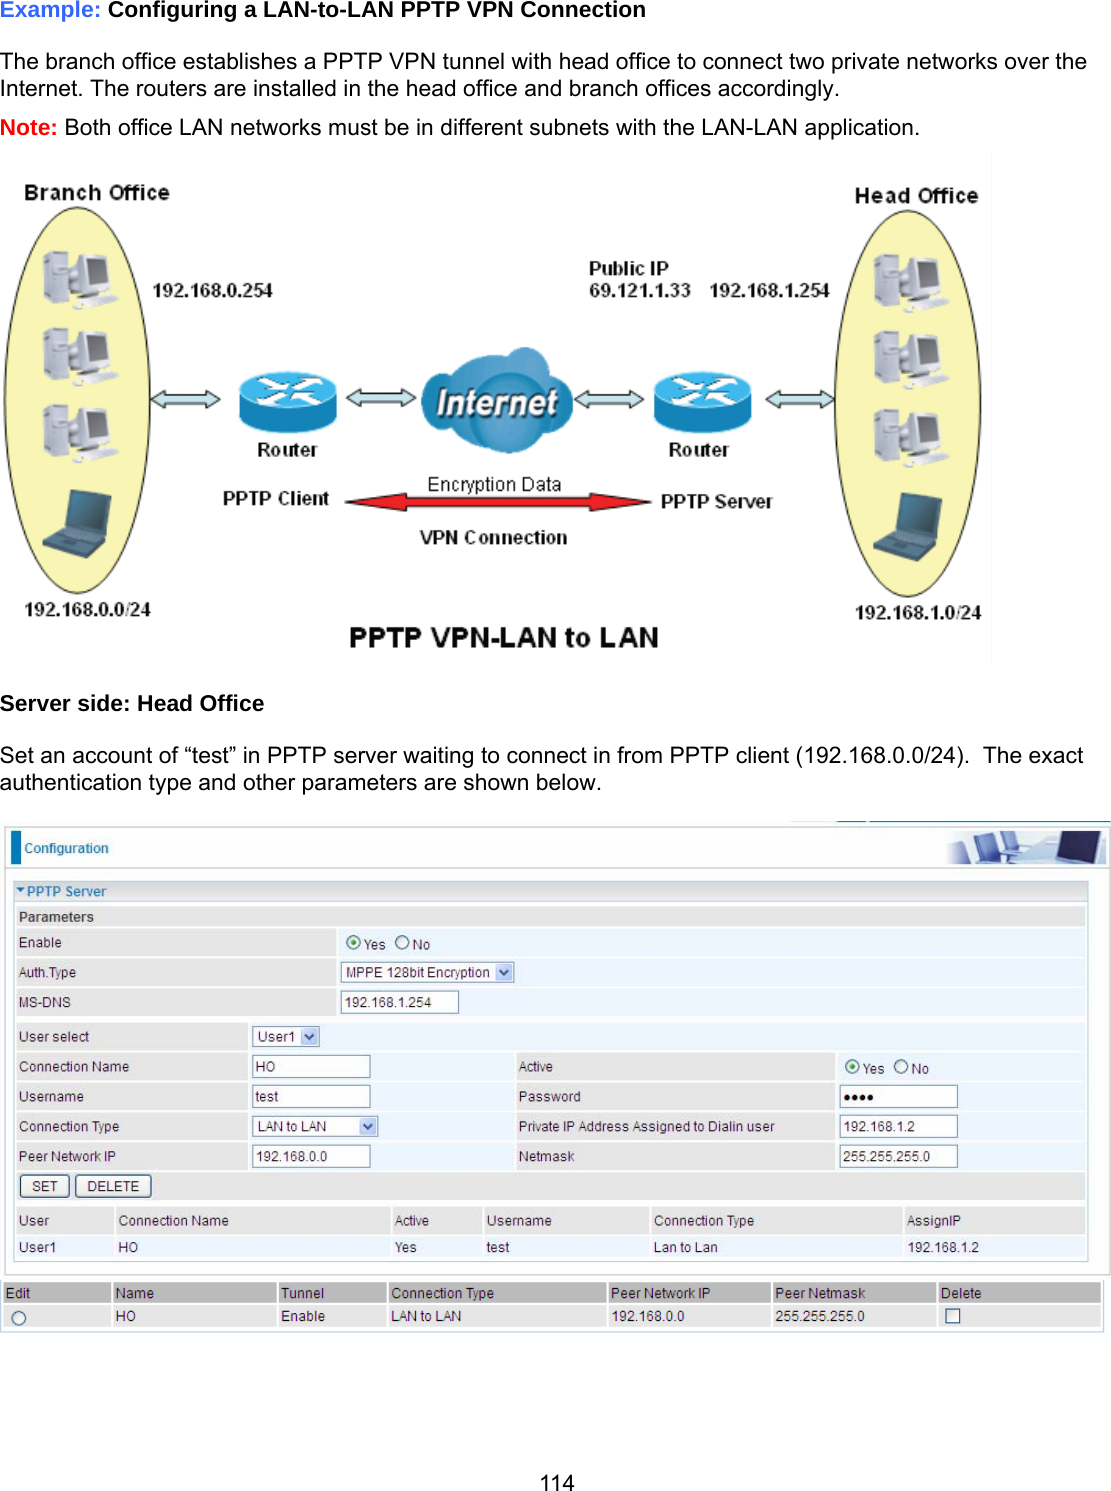 114 Example: Configuring a LAN-to-LAN PPTP VPN Connection  The branch office establishes a PPTP VPN tunnel with head office to connect two private networks over the Internet. The routers are installed in the head office and branch offices accordingly. Note: Both office LAN networks must be in different subnets with the LAN-LAN application.   Server side: Head Office  Set an account of “test” in PPTP server waiting to connect in from PPTP client (192.168.0.0/24).  The exact authentication type and other parameters are shown below.        